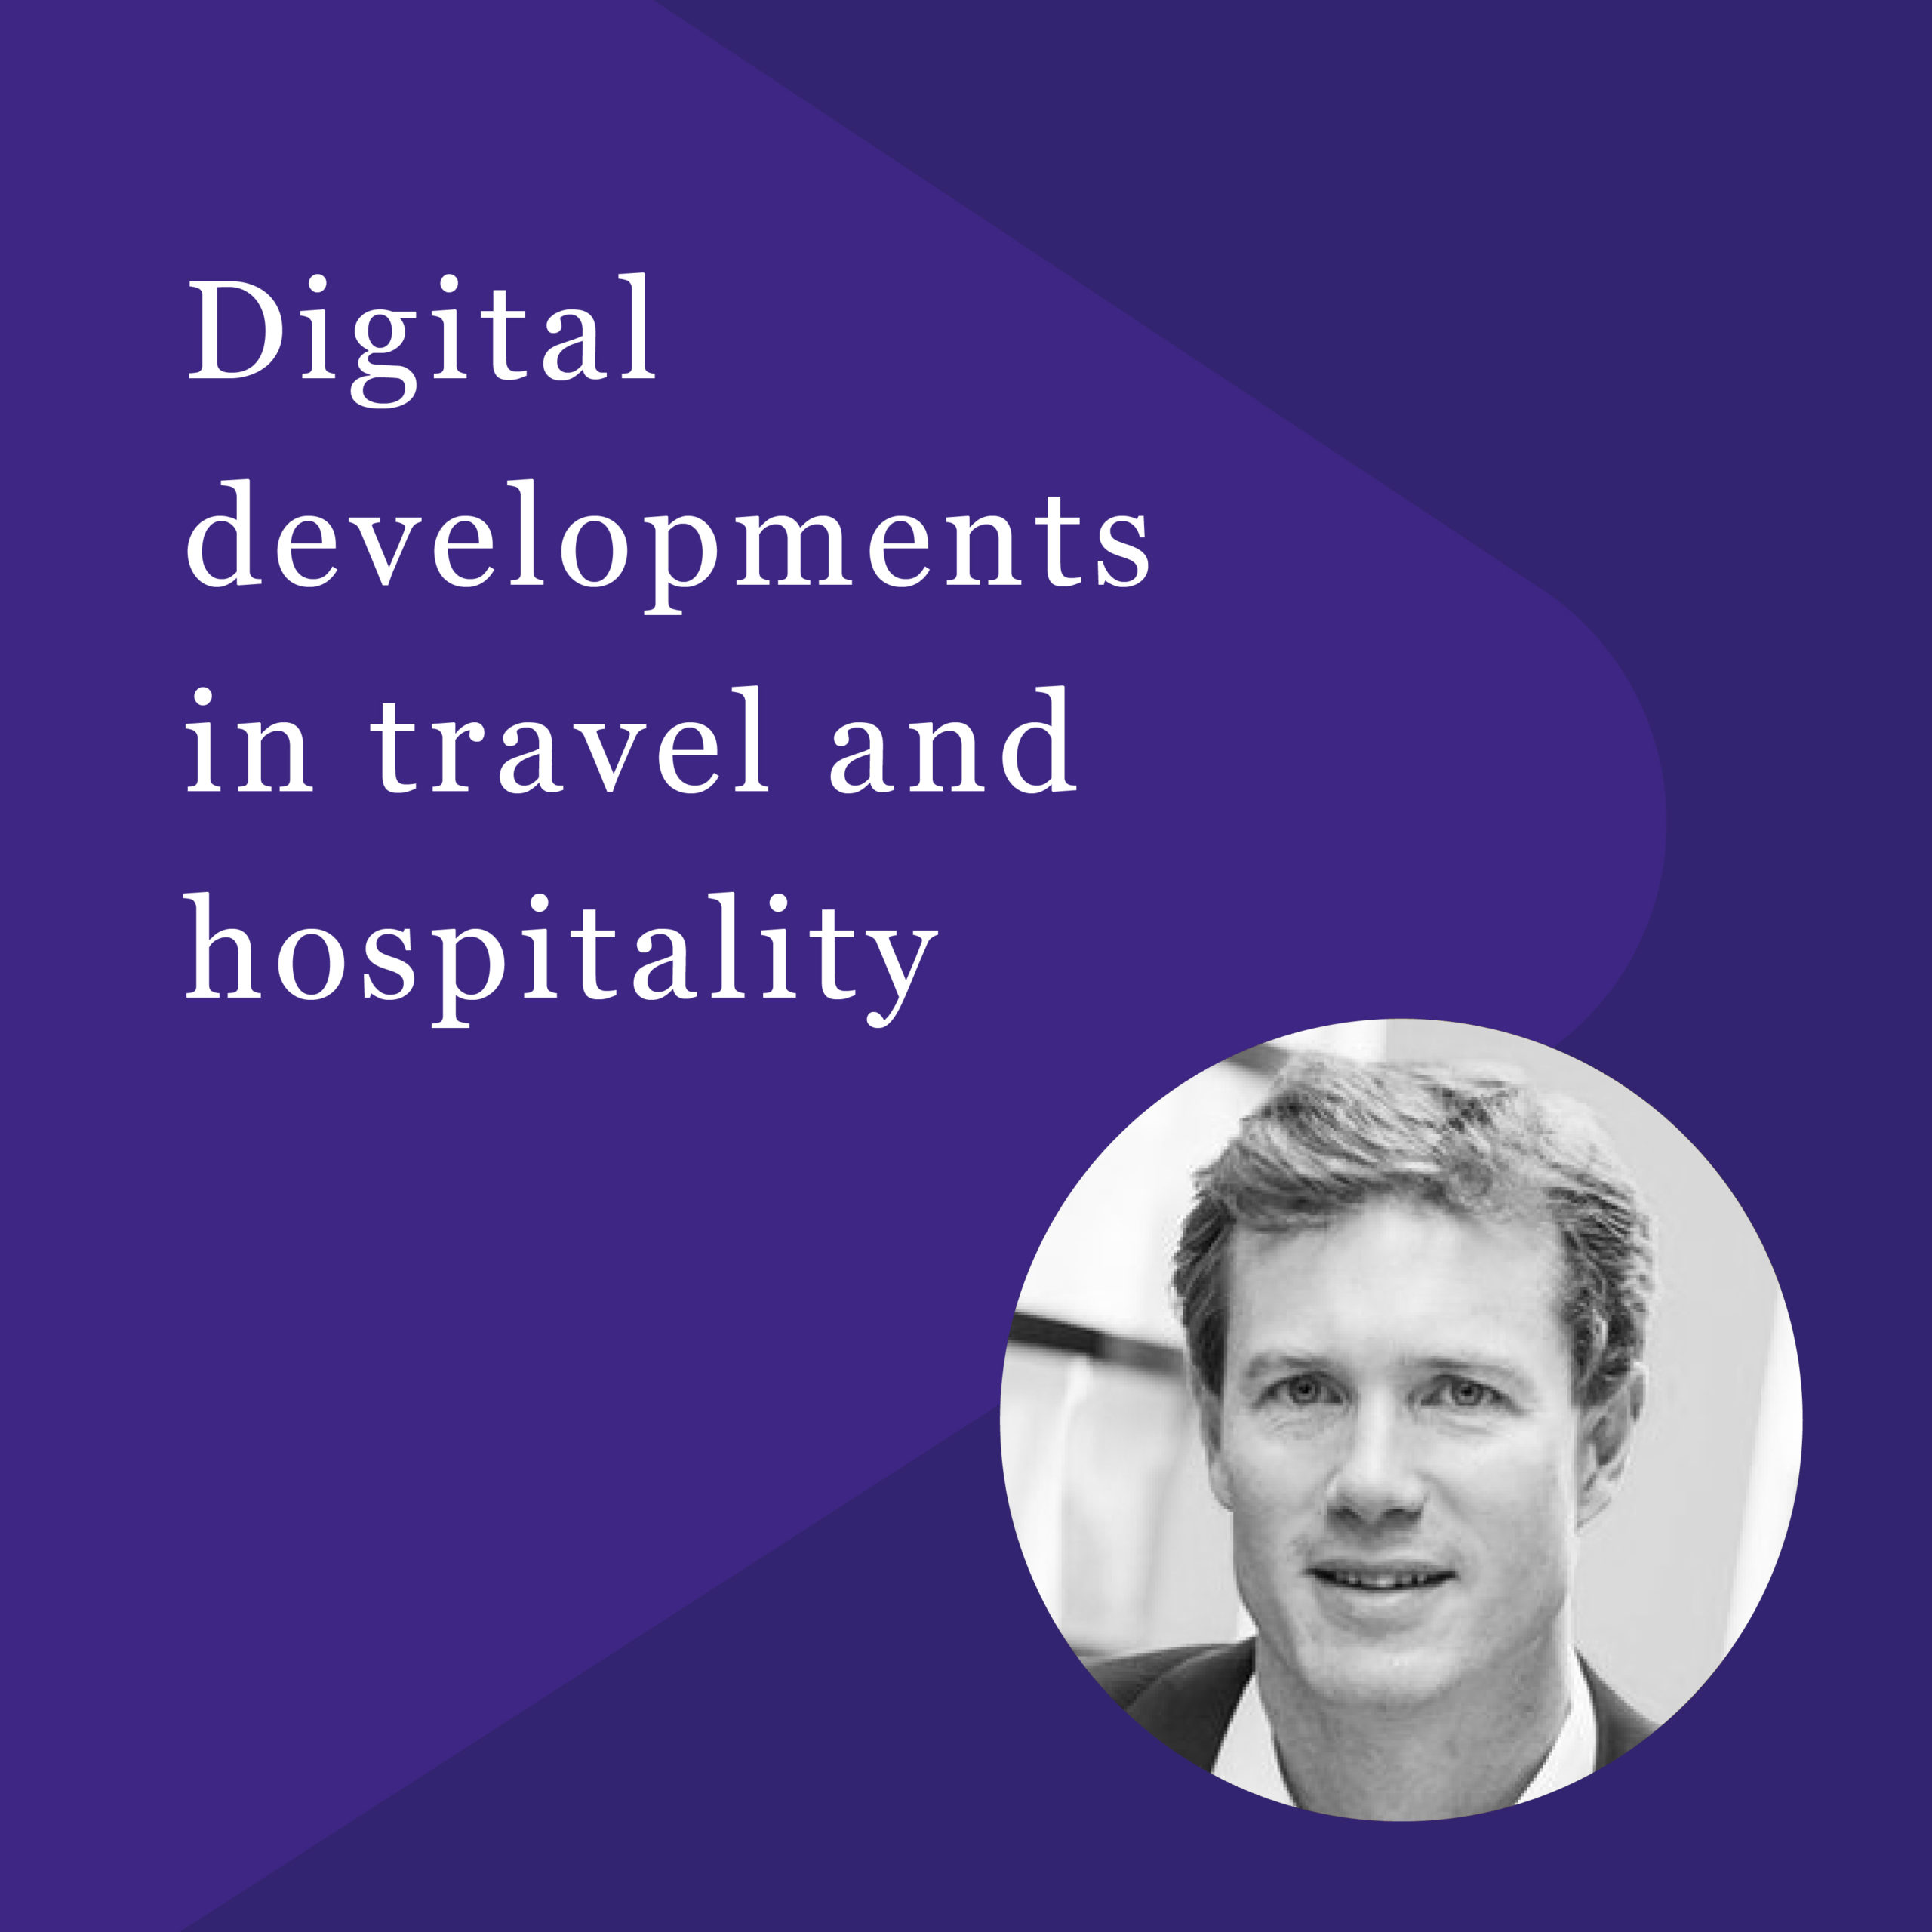 Digital developments in travel and hospitality - PACE Dimensions